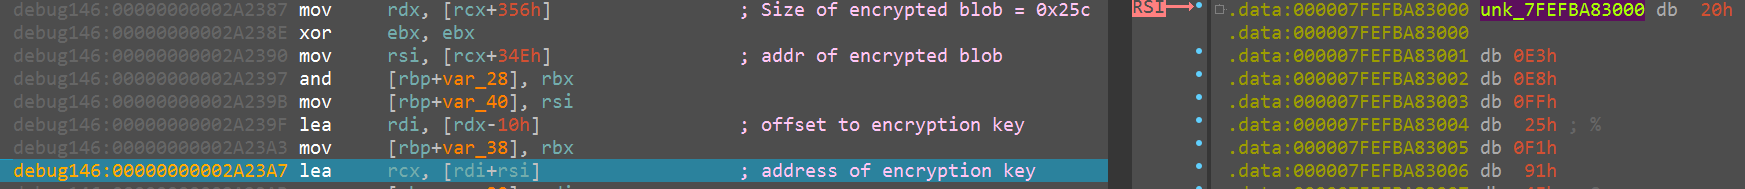 Image 10 is a screenshot of the encryption key for IcedID stage two. Highlighted is the address of the encryption key, which is below the line offset to encryption key.